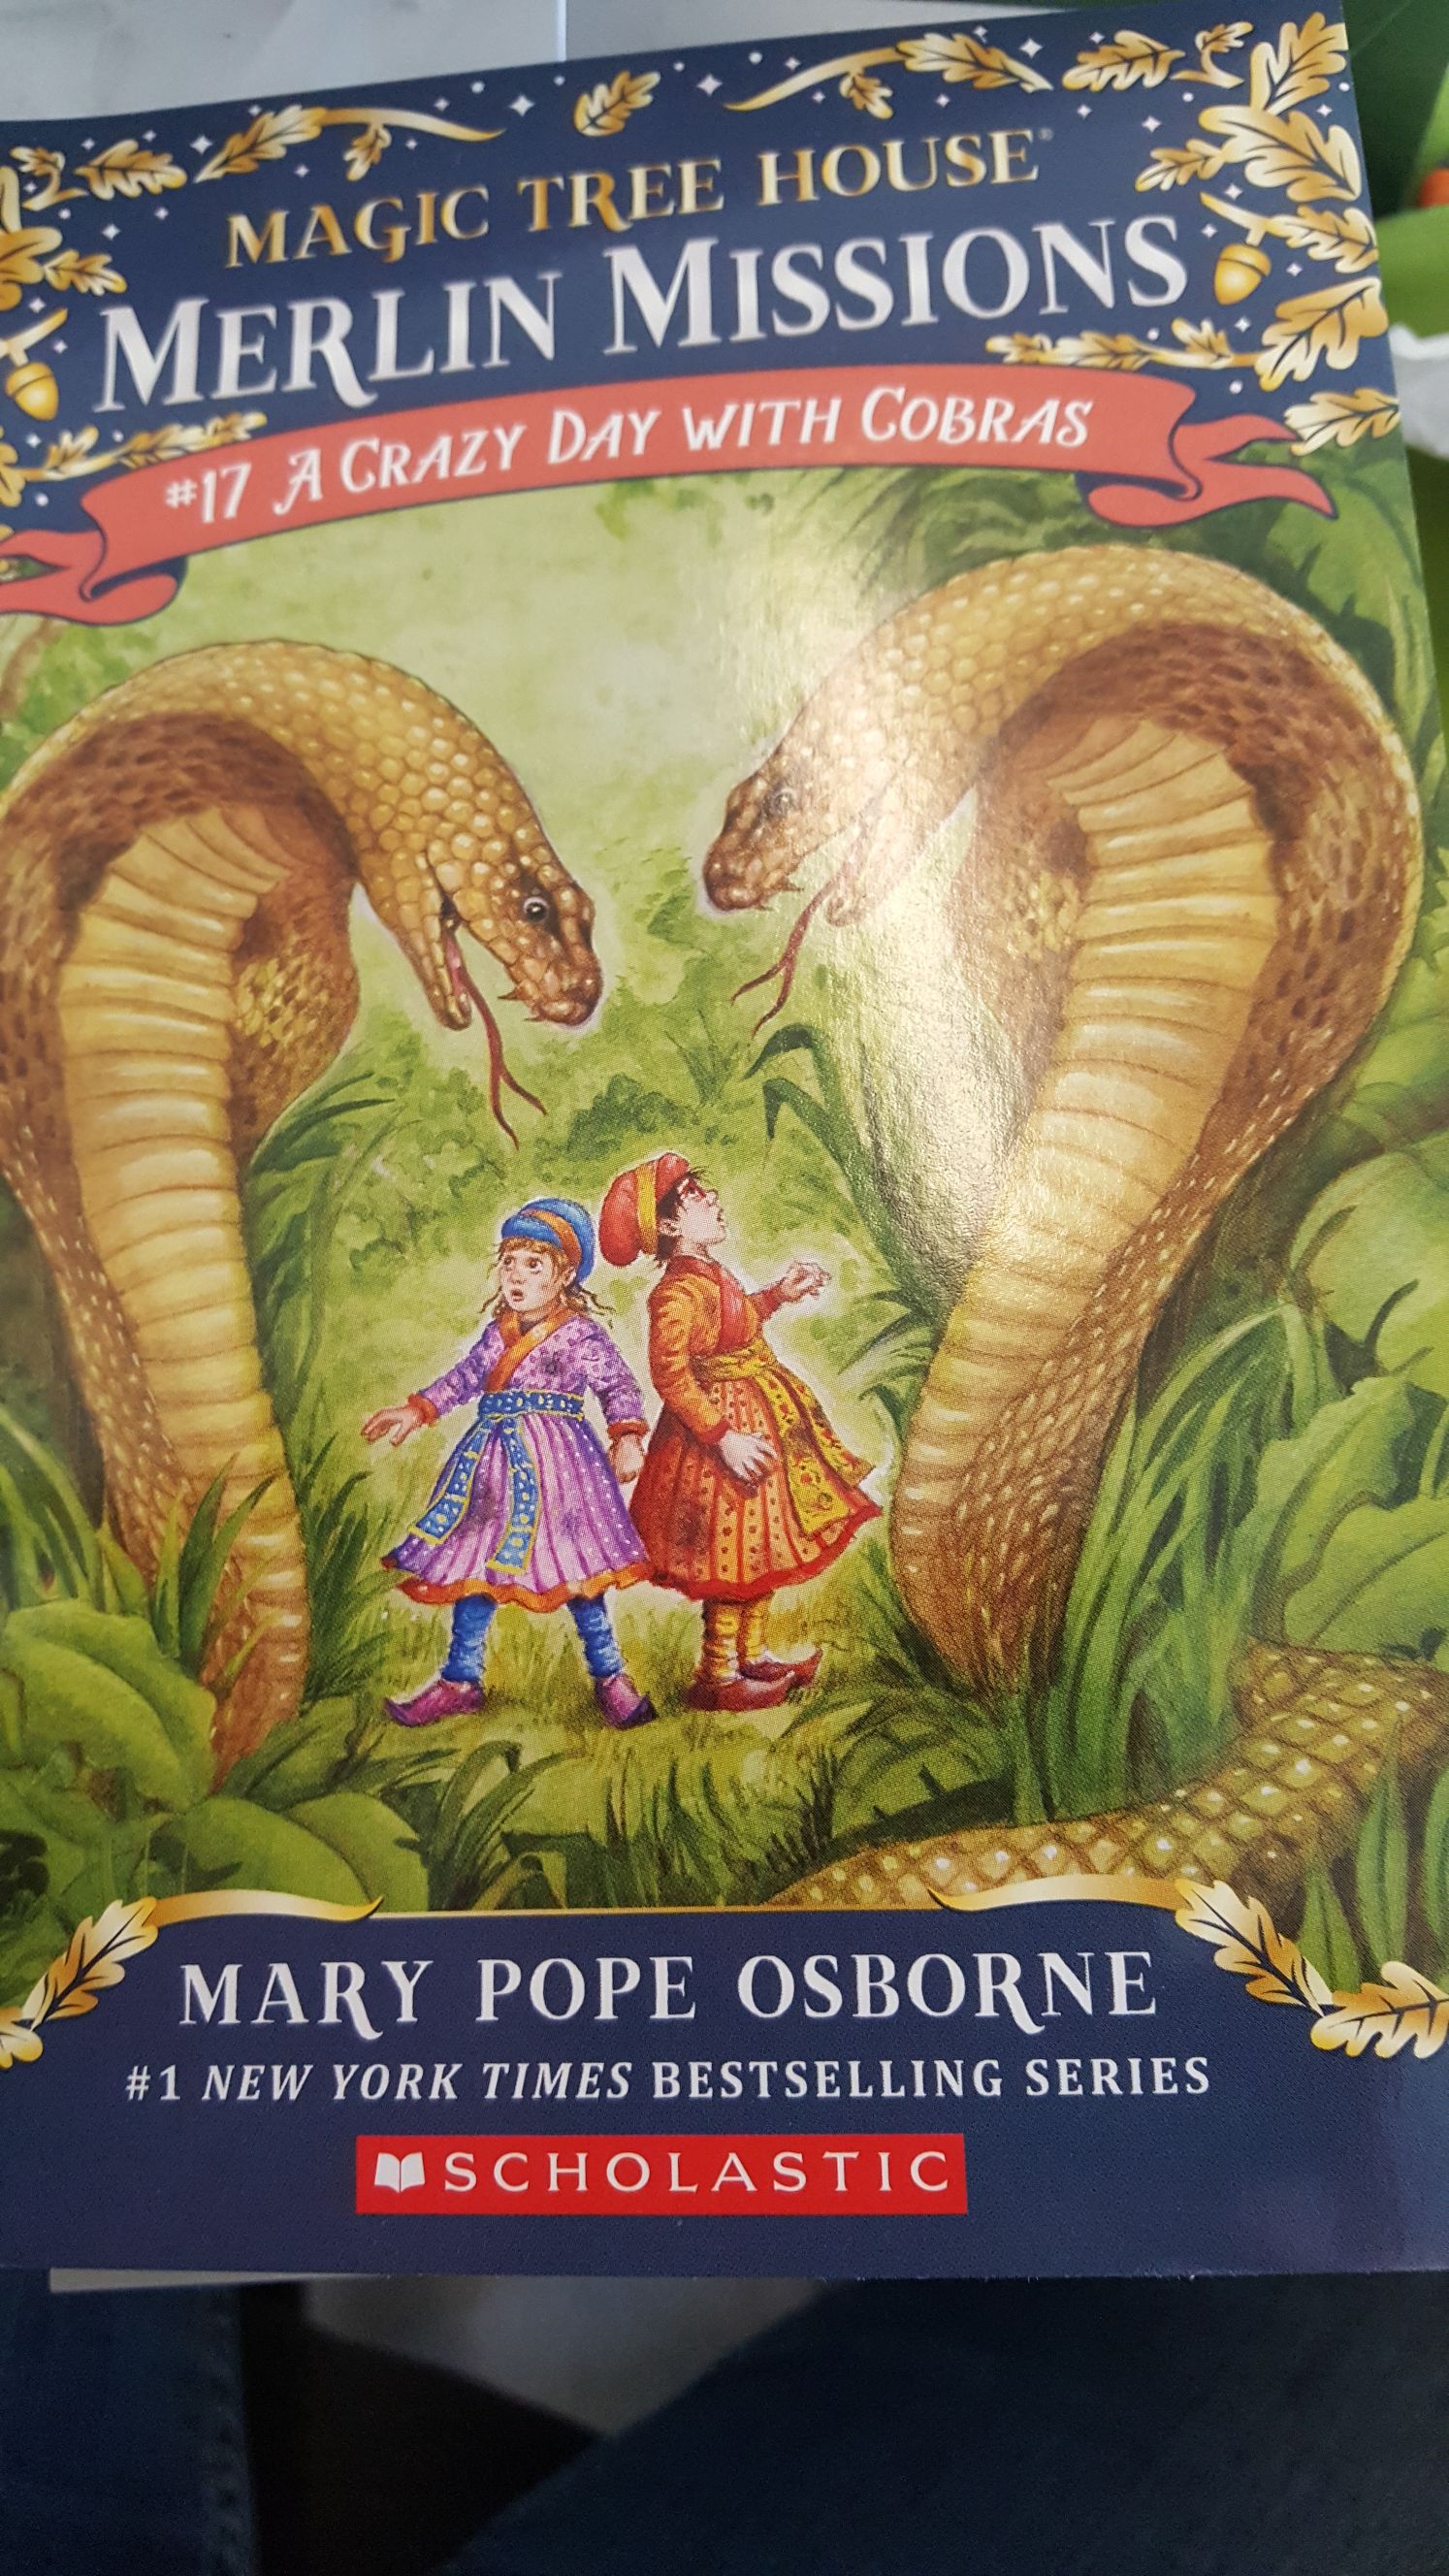 A Crazy Day With Cobras - Mary Pope Osborne (Scholastic - Paperback) book collectible [Barcode 9781338224924] - Main Image 1